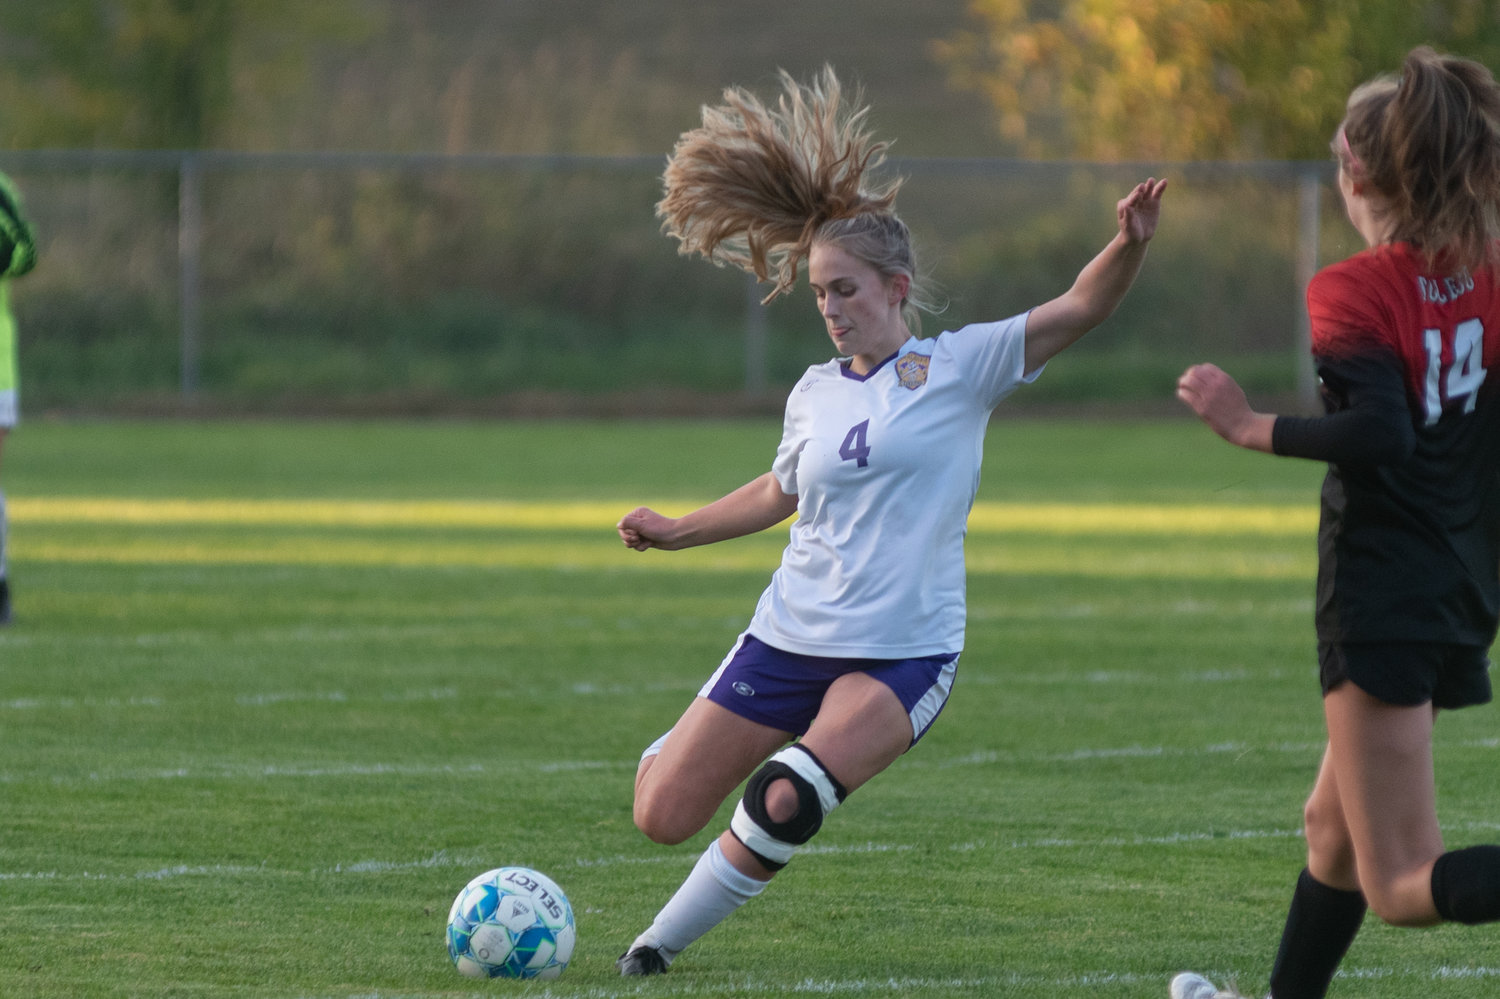 Onalaska's Jaycee Talley clears a ball in the Loggers 2-1 loss to Toledo Oct. 6.